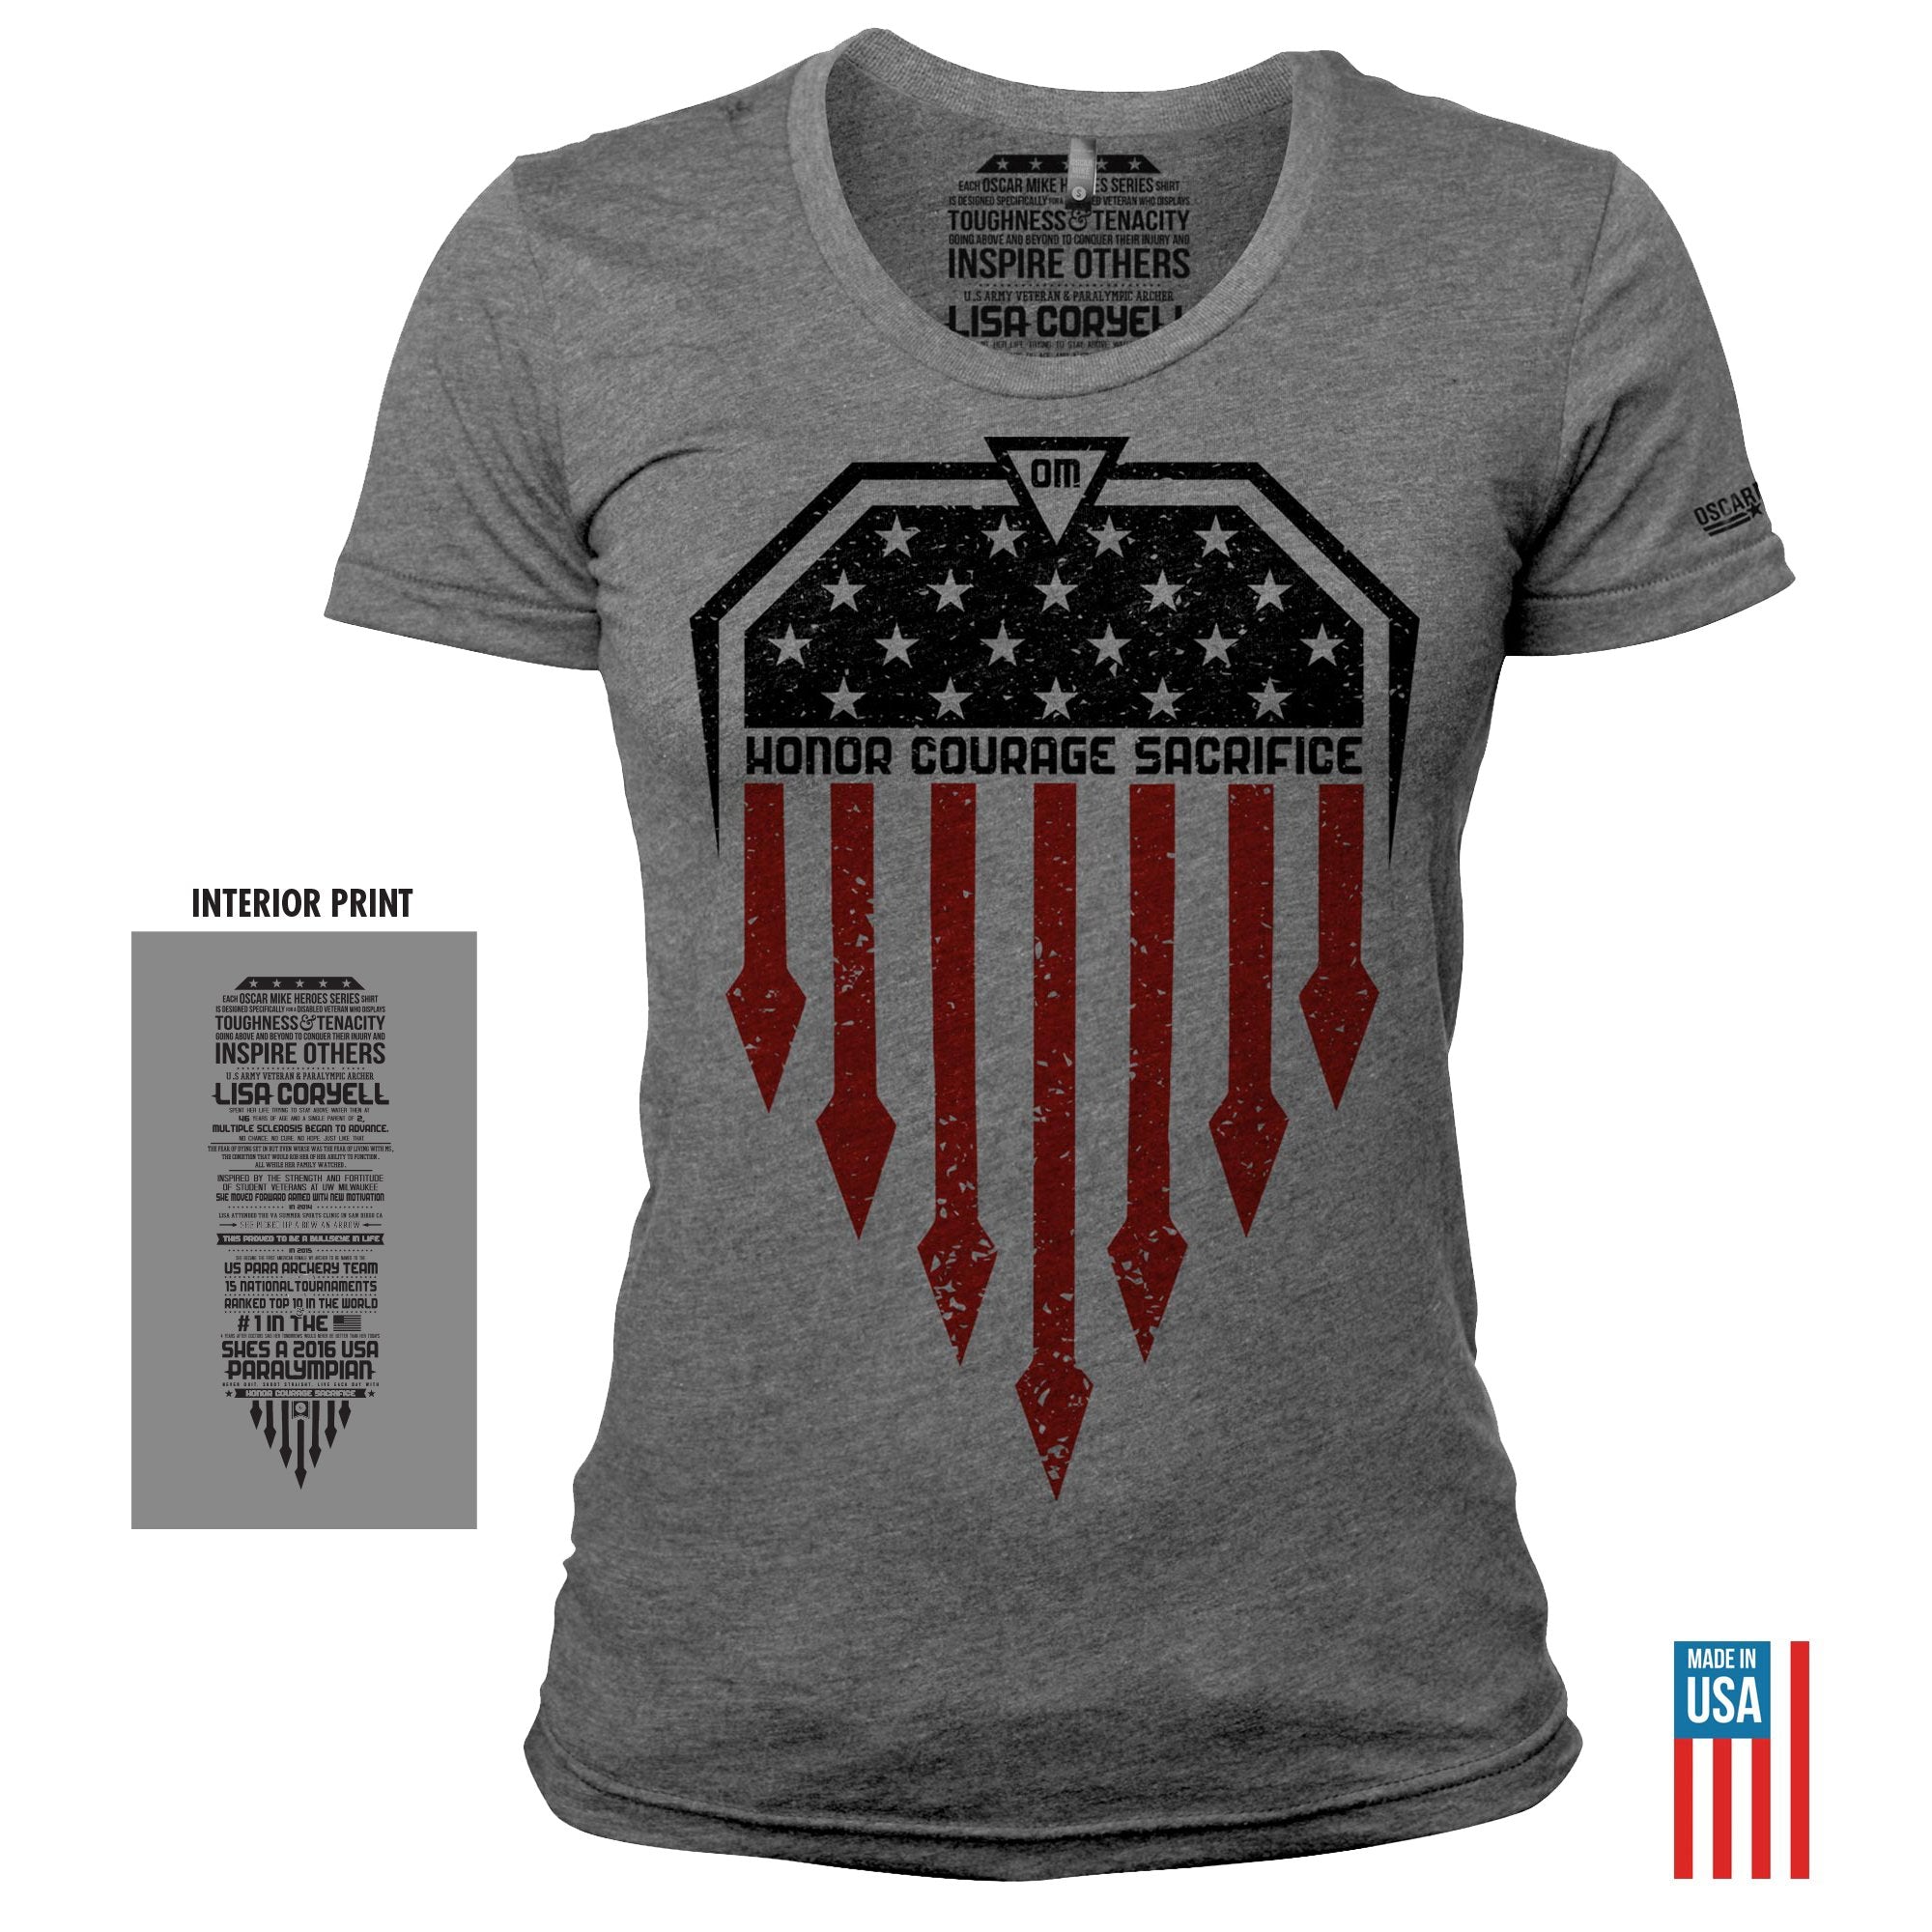 Heroes Series: Women's Lisa Coryell  Tee T-Shirt from Oscar Mike Apparel